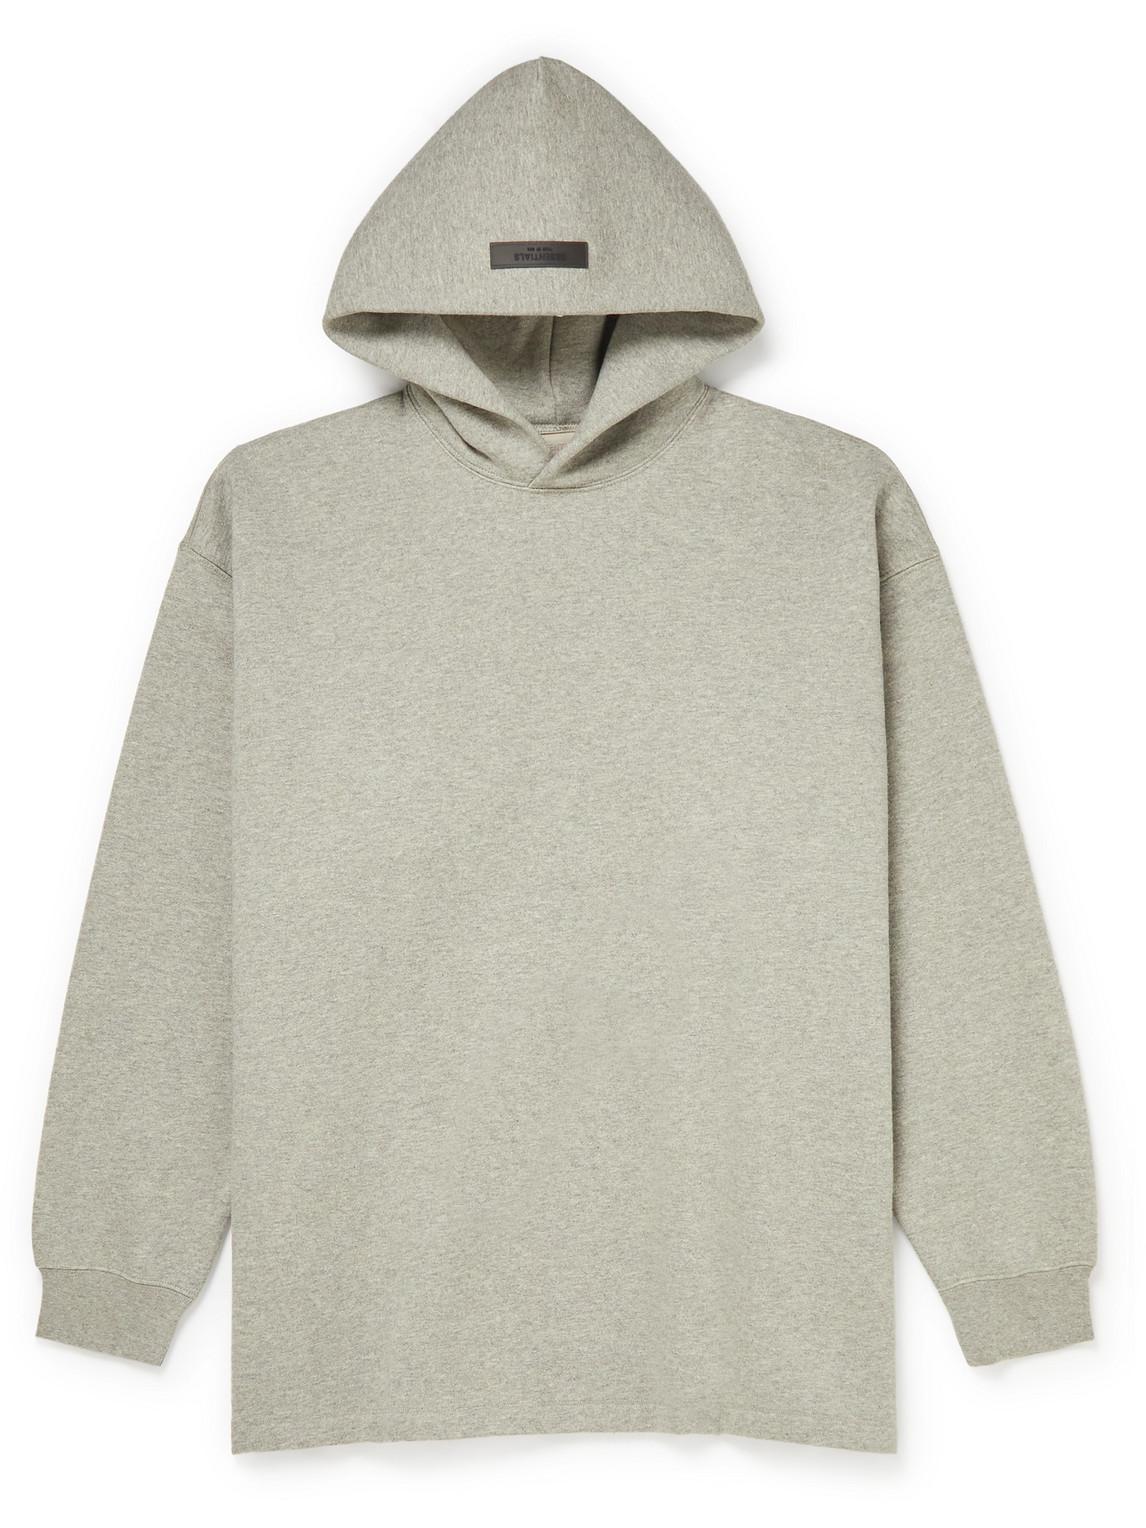 Fear of God ESSENTIALS Logo-flocked Cotton-blend Jersey Hoodie in Gray ...